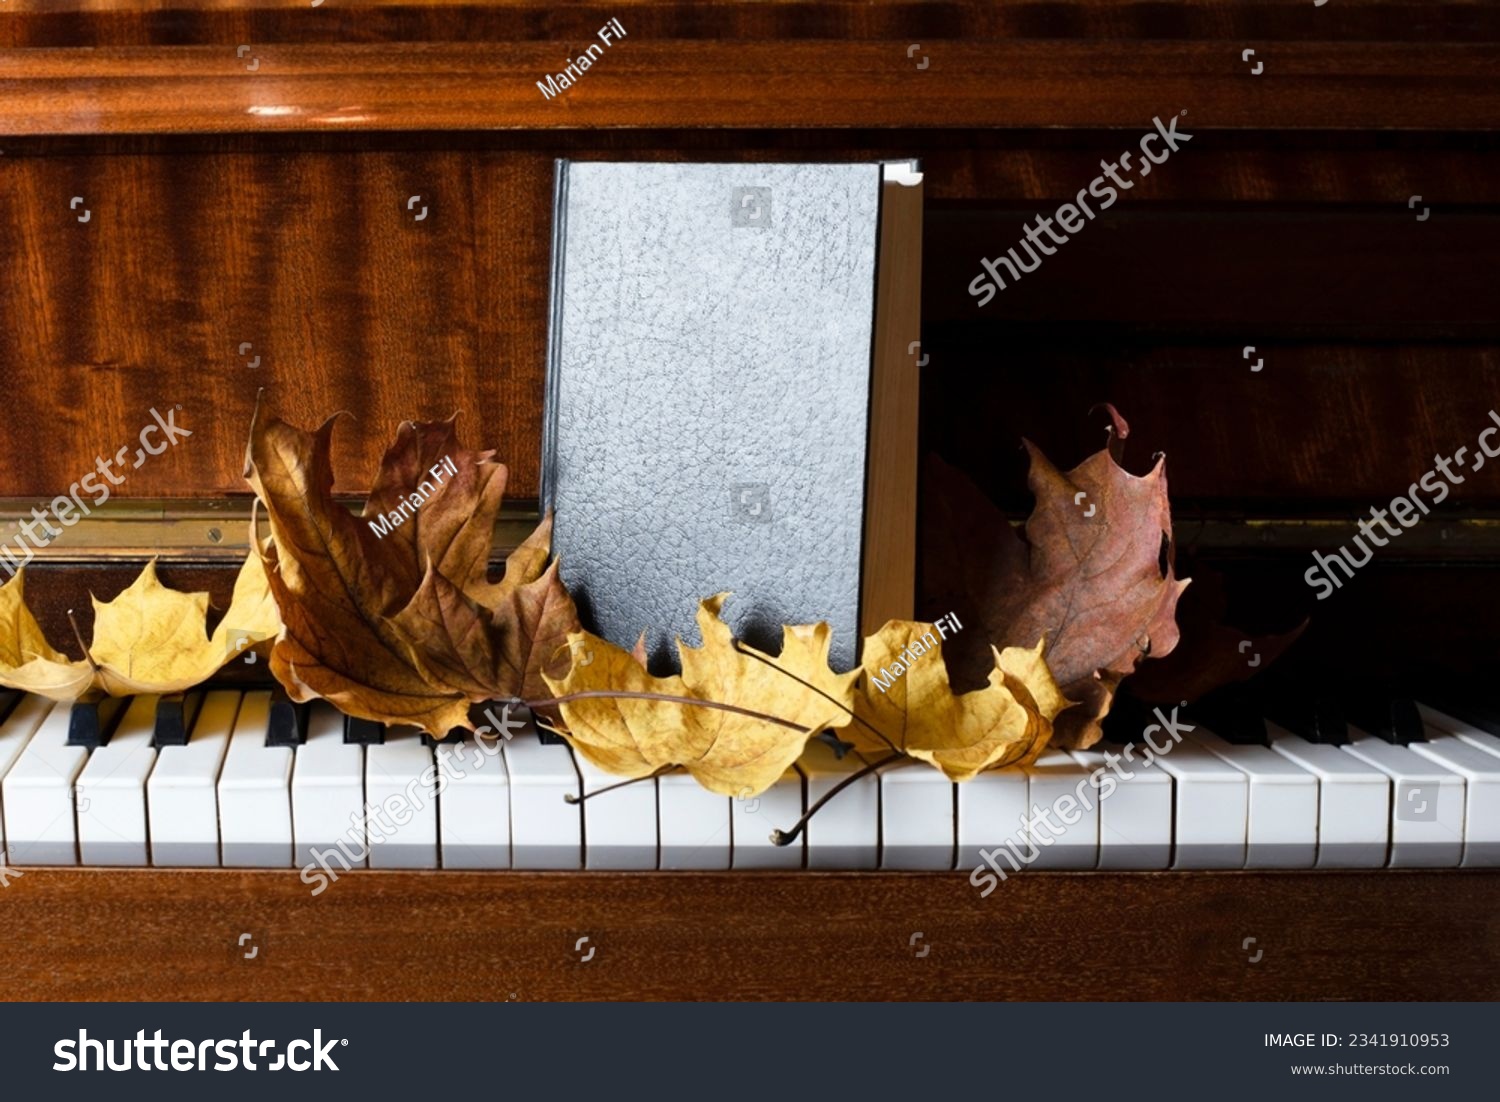 Old classical piano with autumn leaves and a book with a black leather cover, similar to a Bible, the concept of learning, theology #2341910953